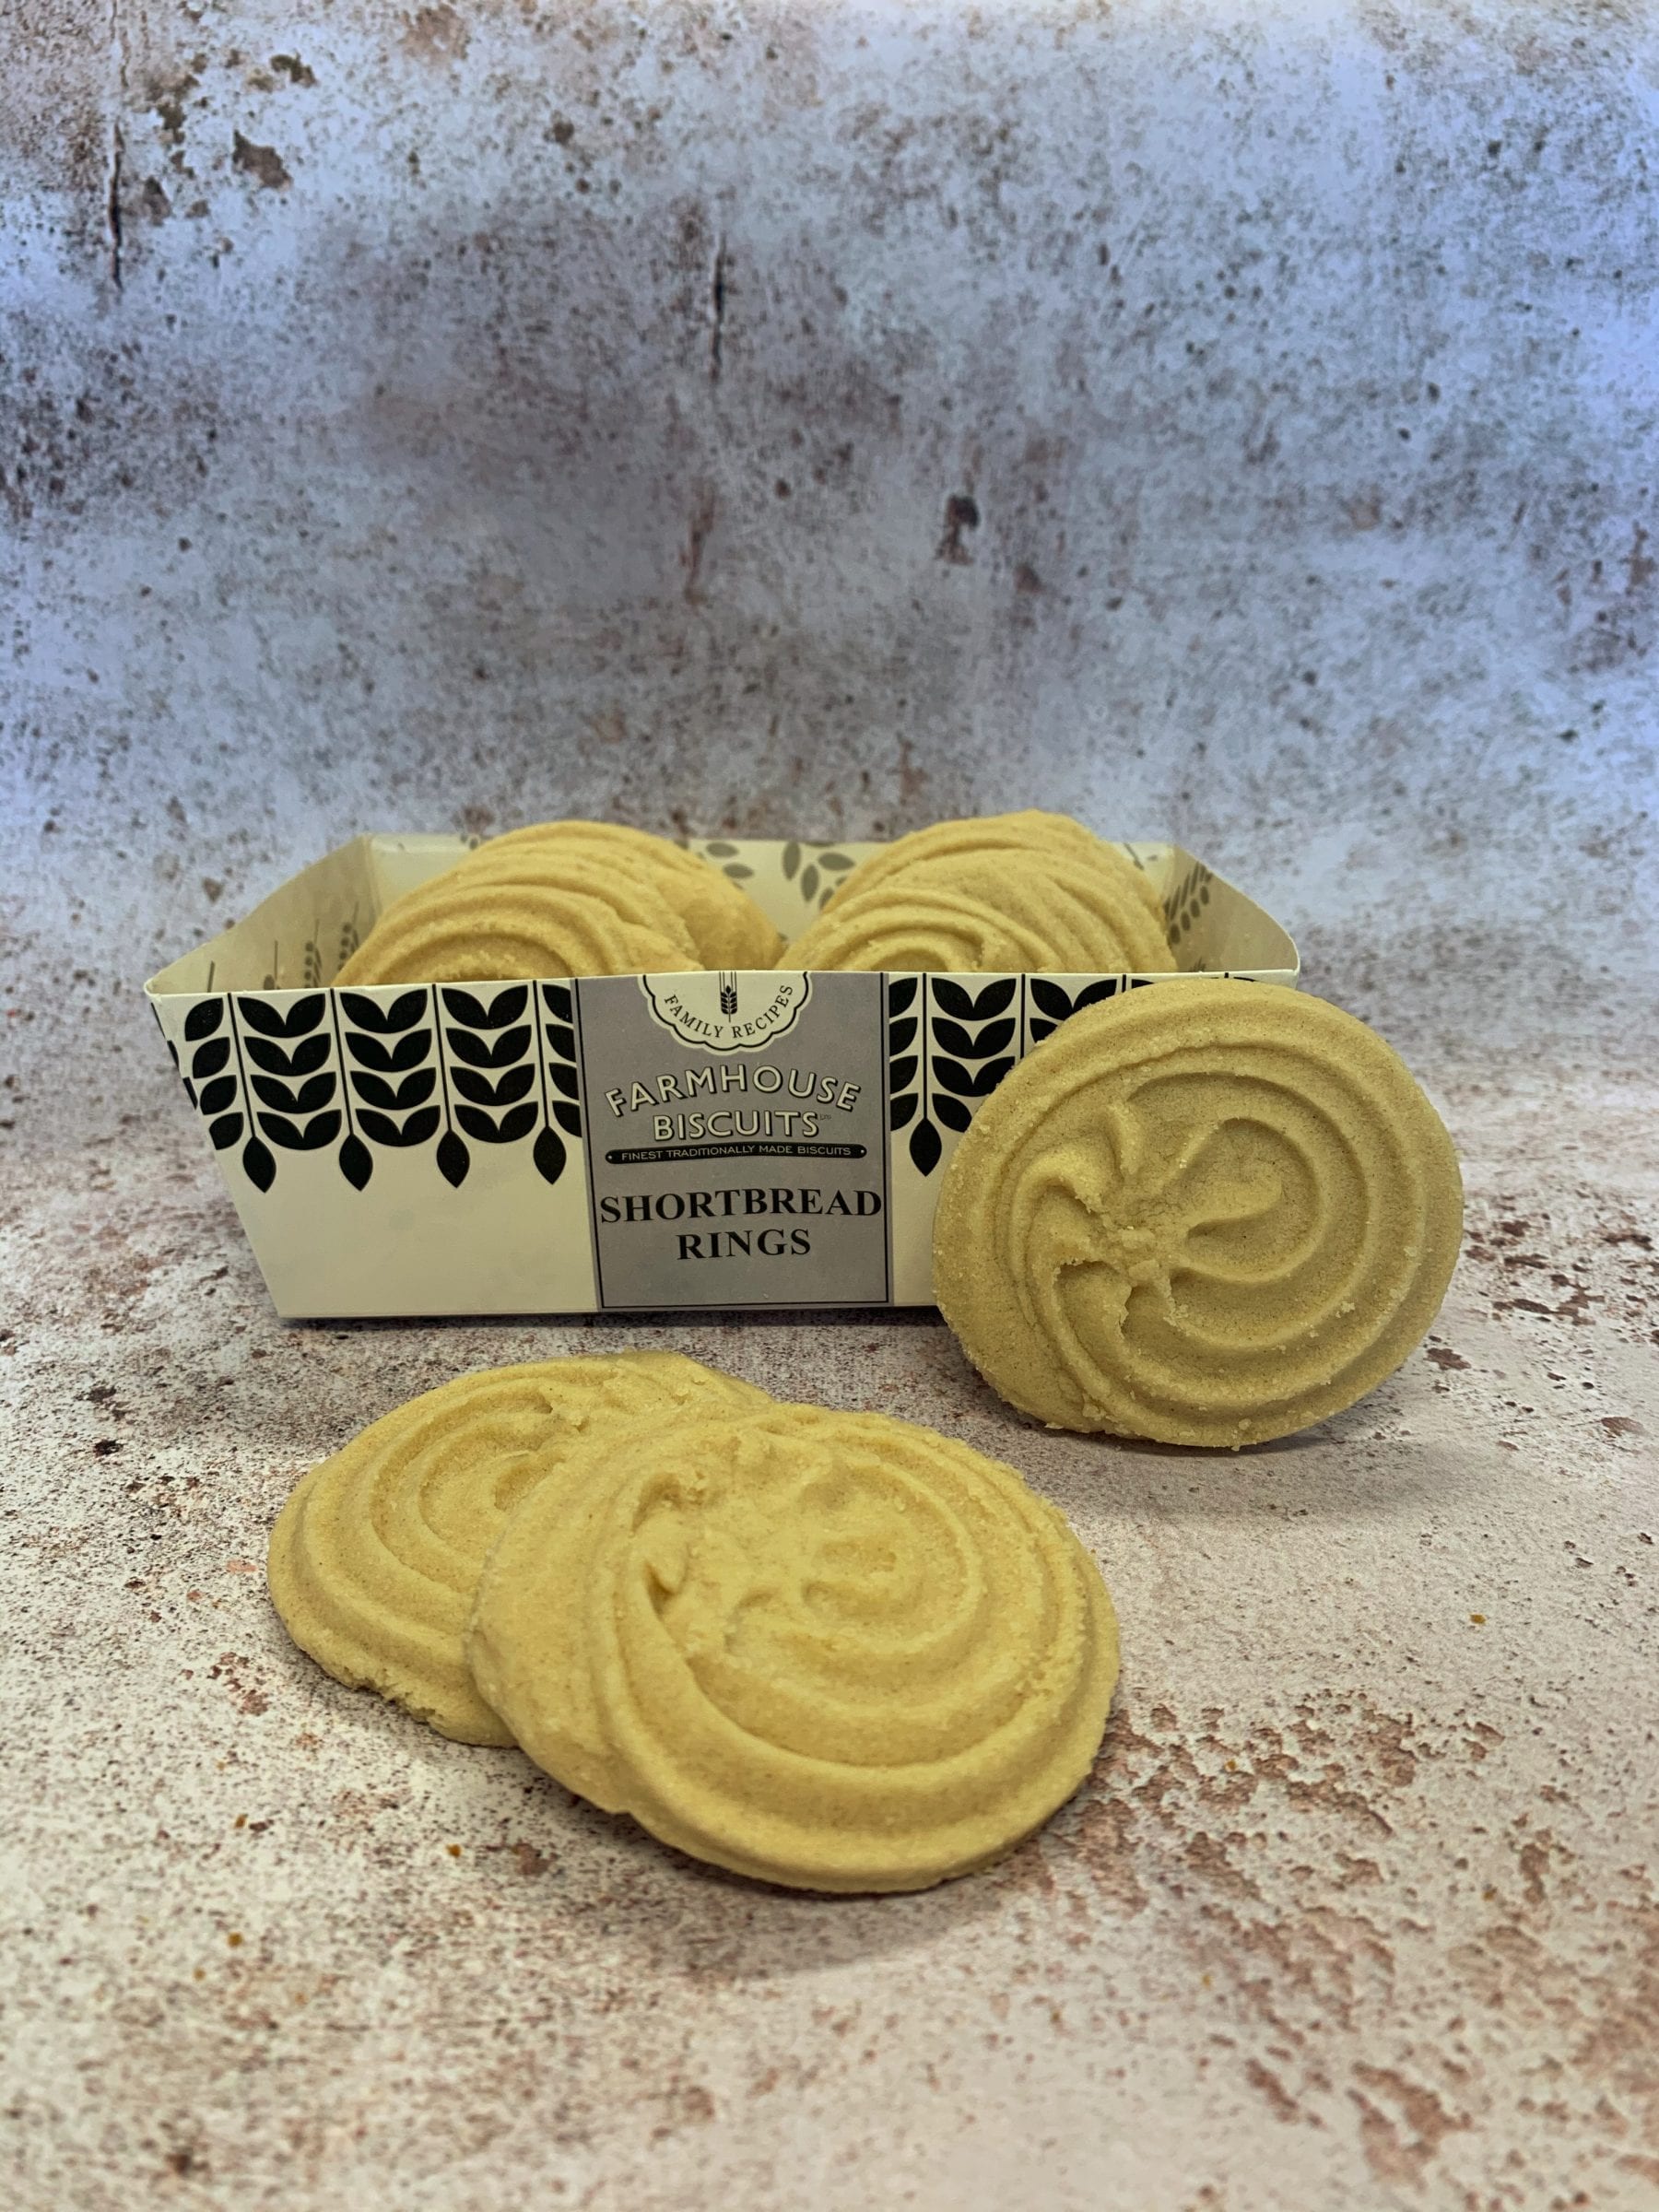 Farmhouse Biscuits Shortbread Rings 200g Hartley Farm Shop And Kitchen